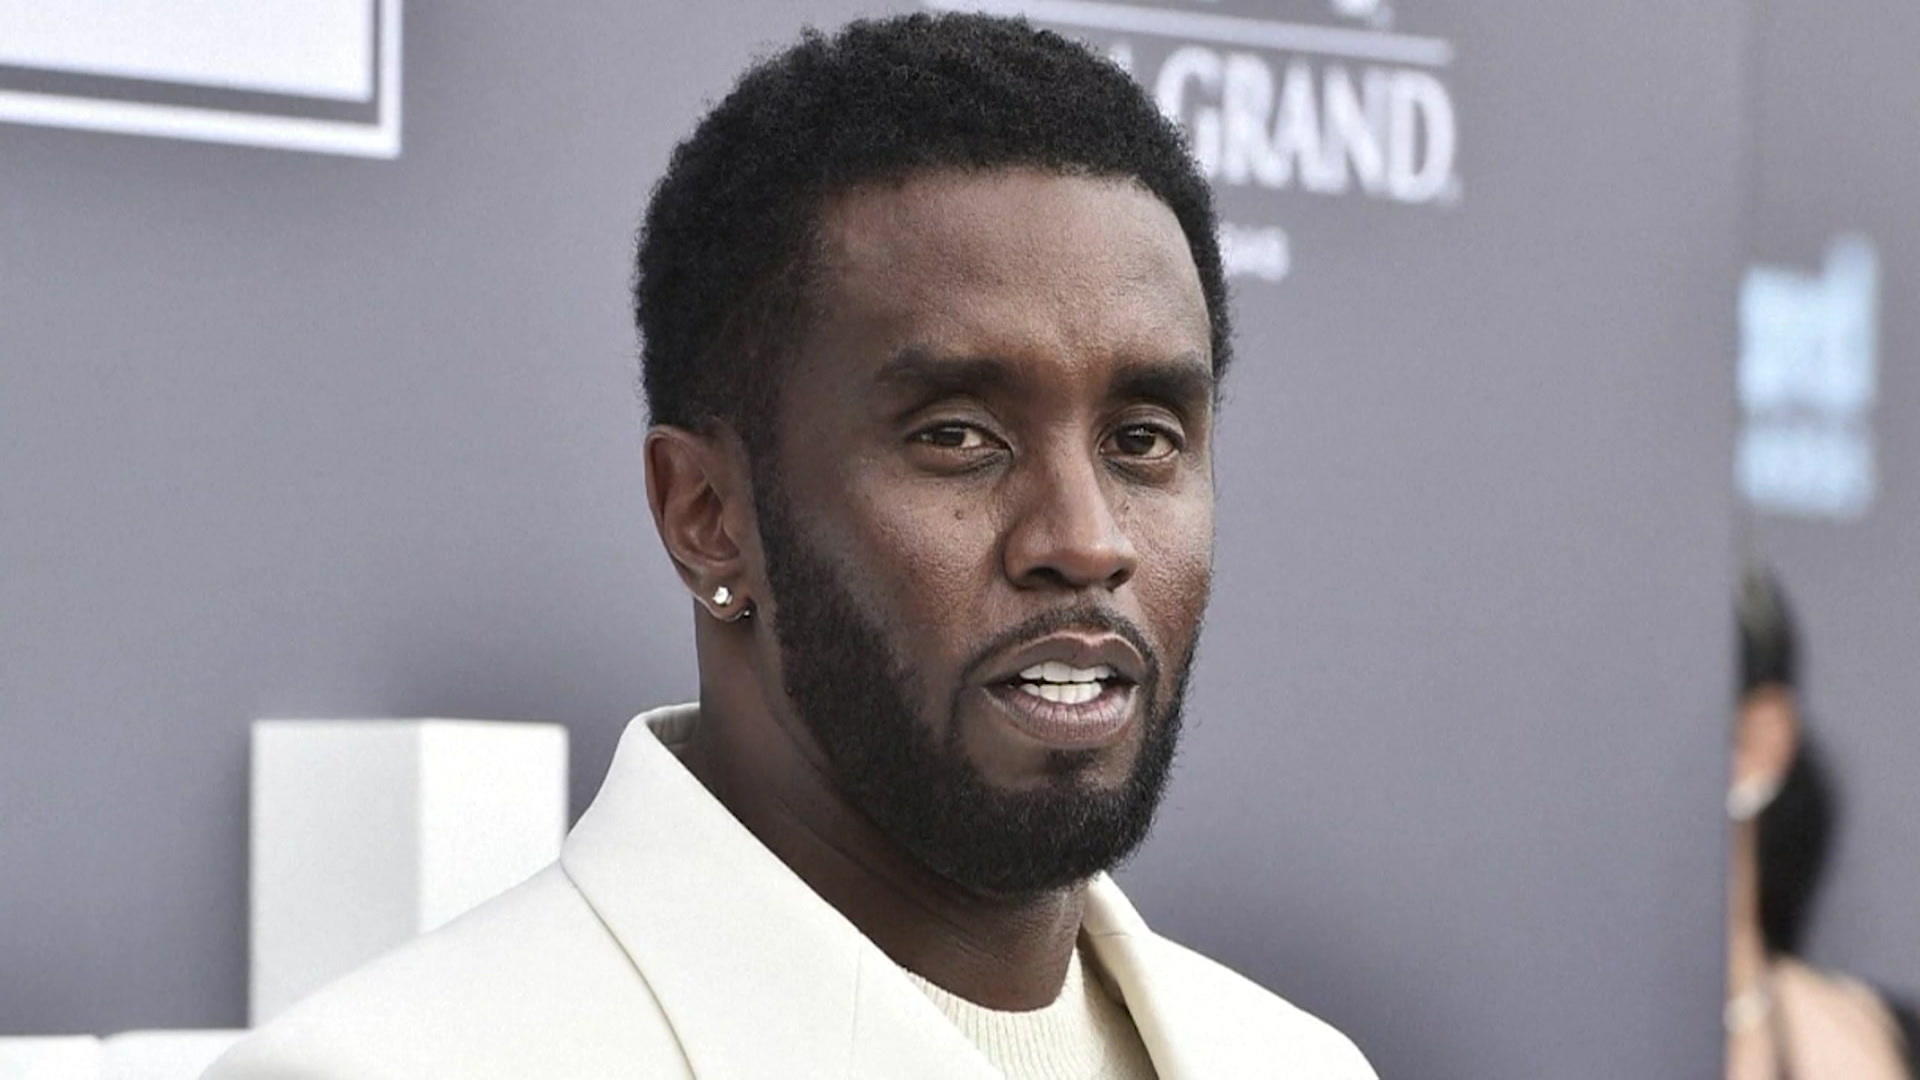 Raids on rapper Sean “Diddy” Combs It is said to be about human trafficking